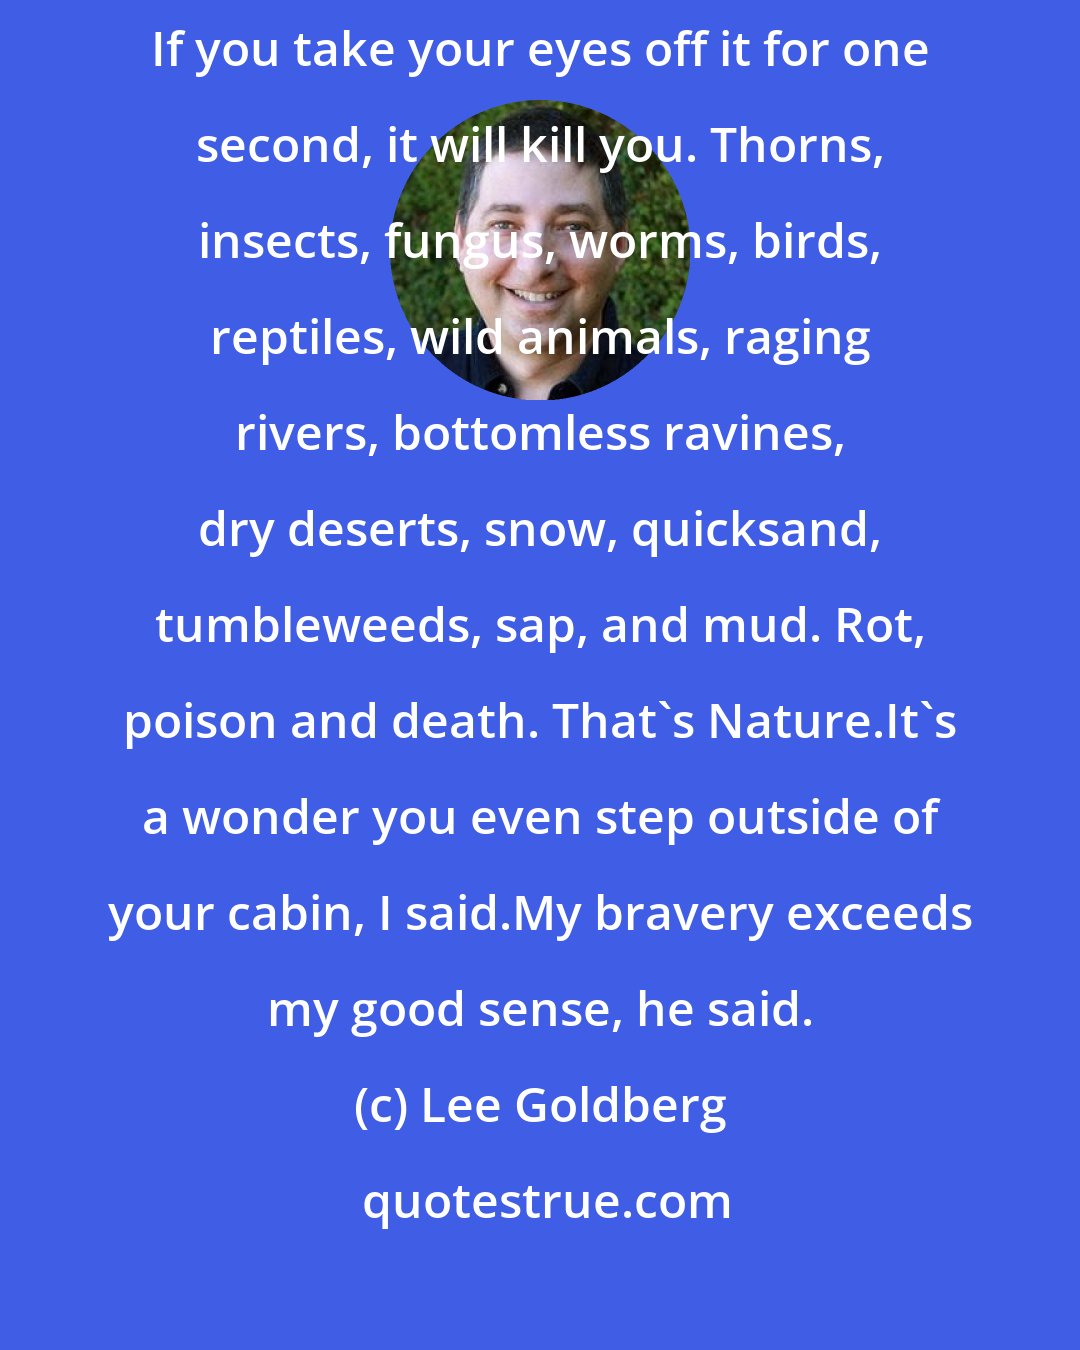 Lee Goldberg: So there you have it: Nature is a rotten mess. But that's only the beginning. If you take your eyes off it for one second, it will kill you. Thorns, insects, fungus, worms, birds, reptiles, wild animals, raging rivers, bottomless ravines, dry deserts, snow, quicksand, tumbleweeds, sap, and mud. Rot, poison and death. That's Nature.It's a wonder you even step outside of your cabin, I said.My bravery exceeds my good sense, he said.